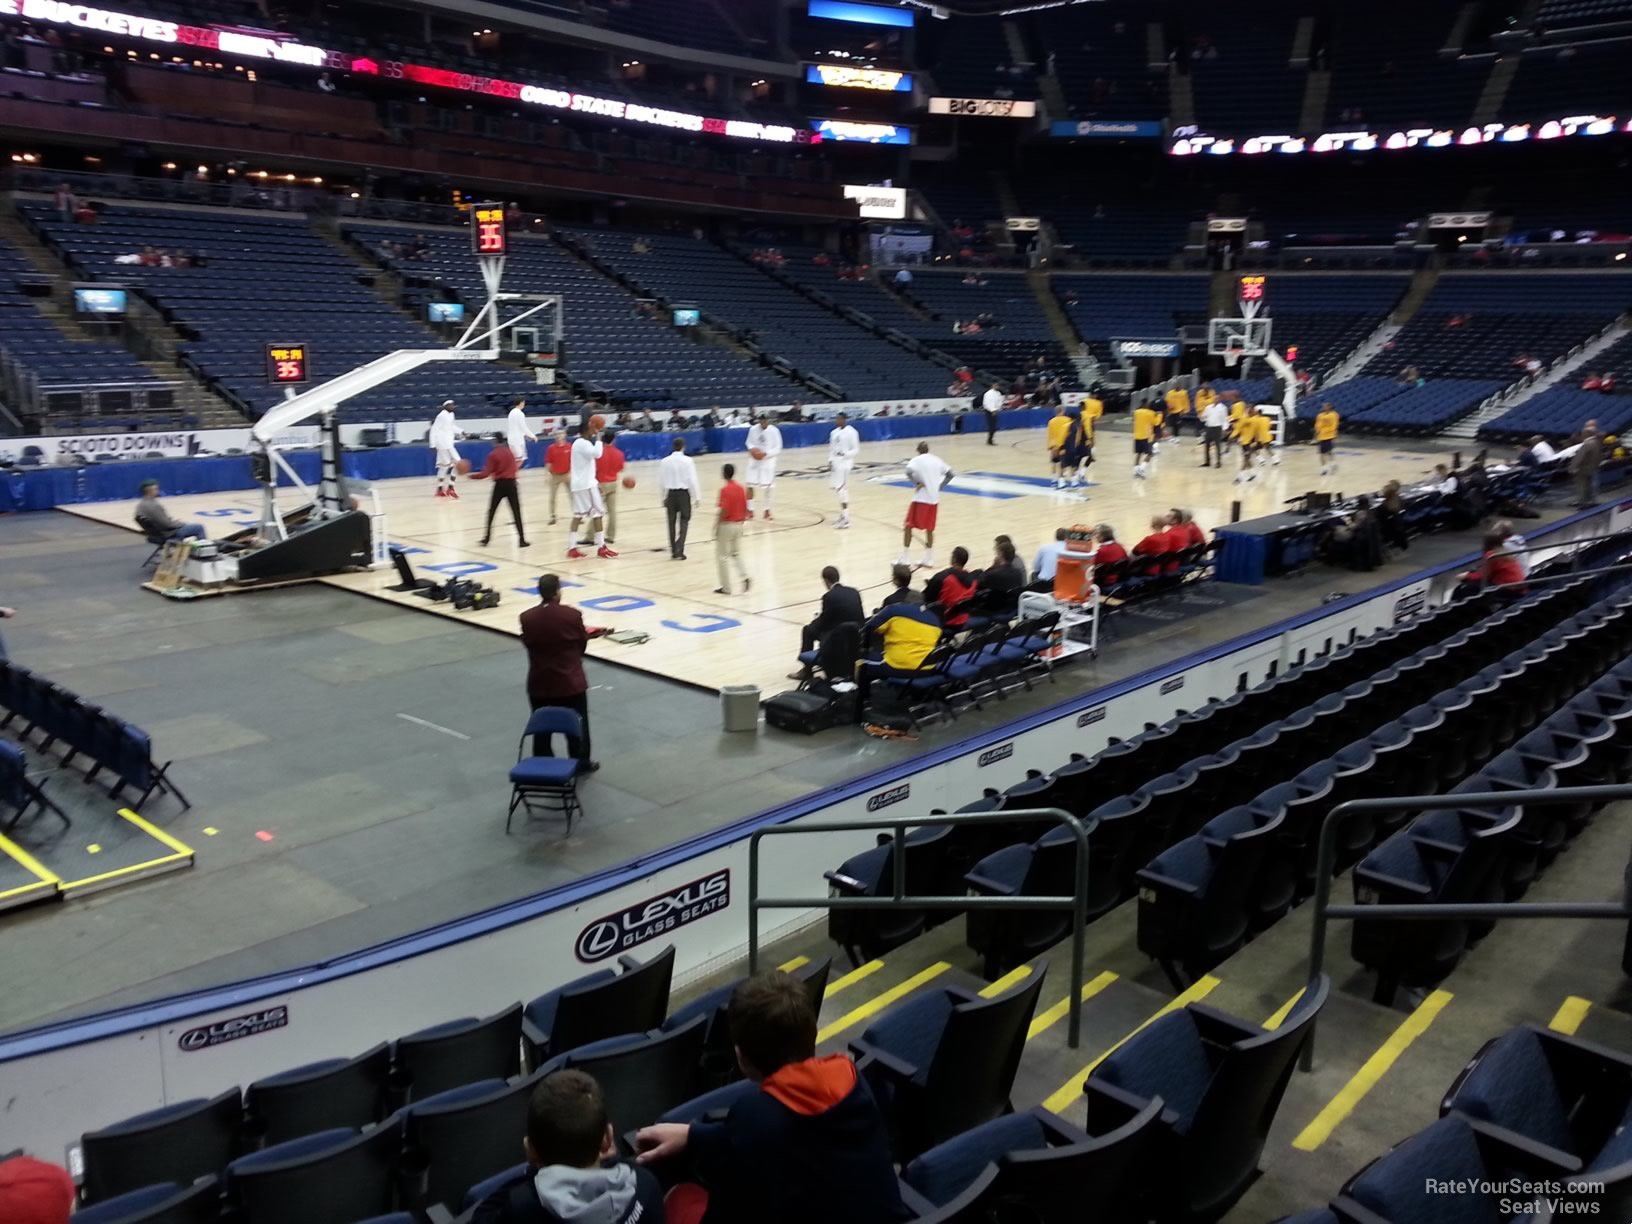 section 106, row g seat view  for basketball - nationwide arena